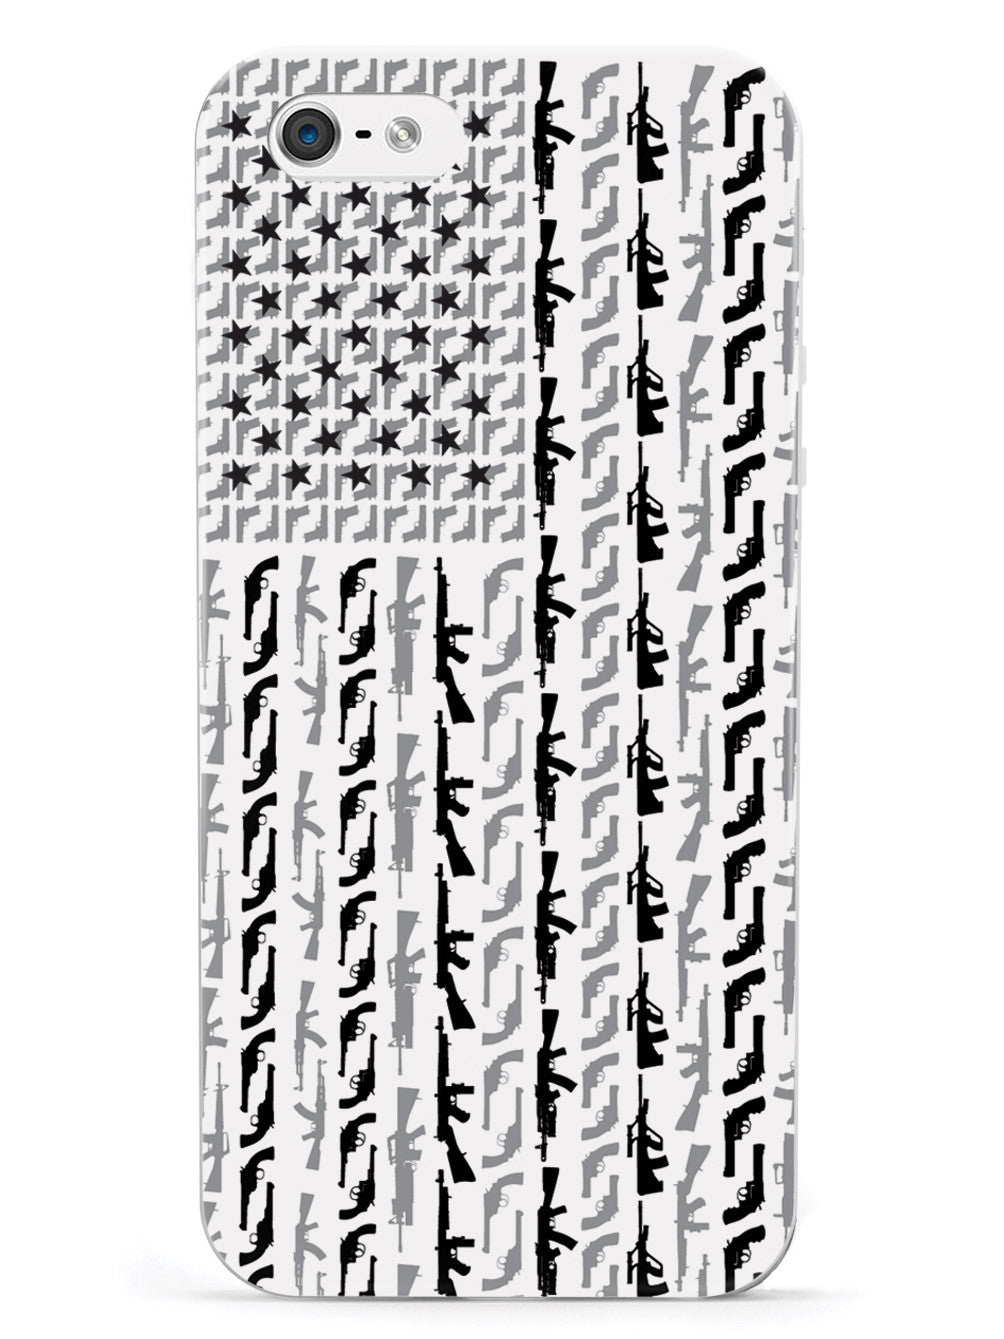 American Flag in Guns - Black and White Case